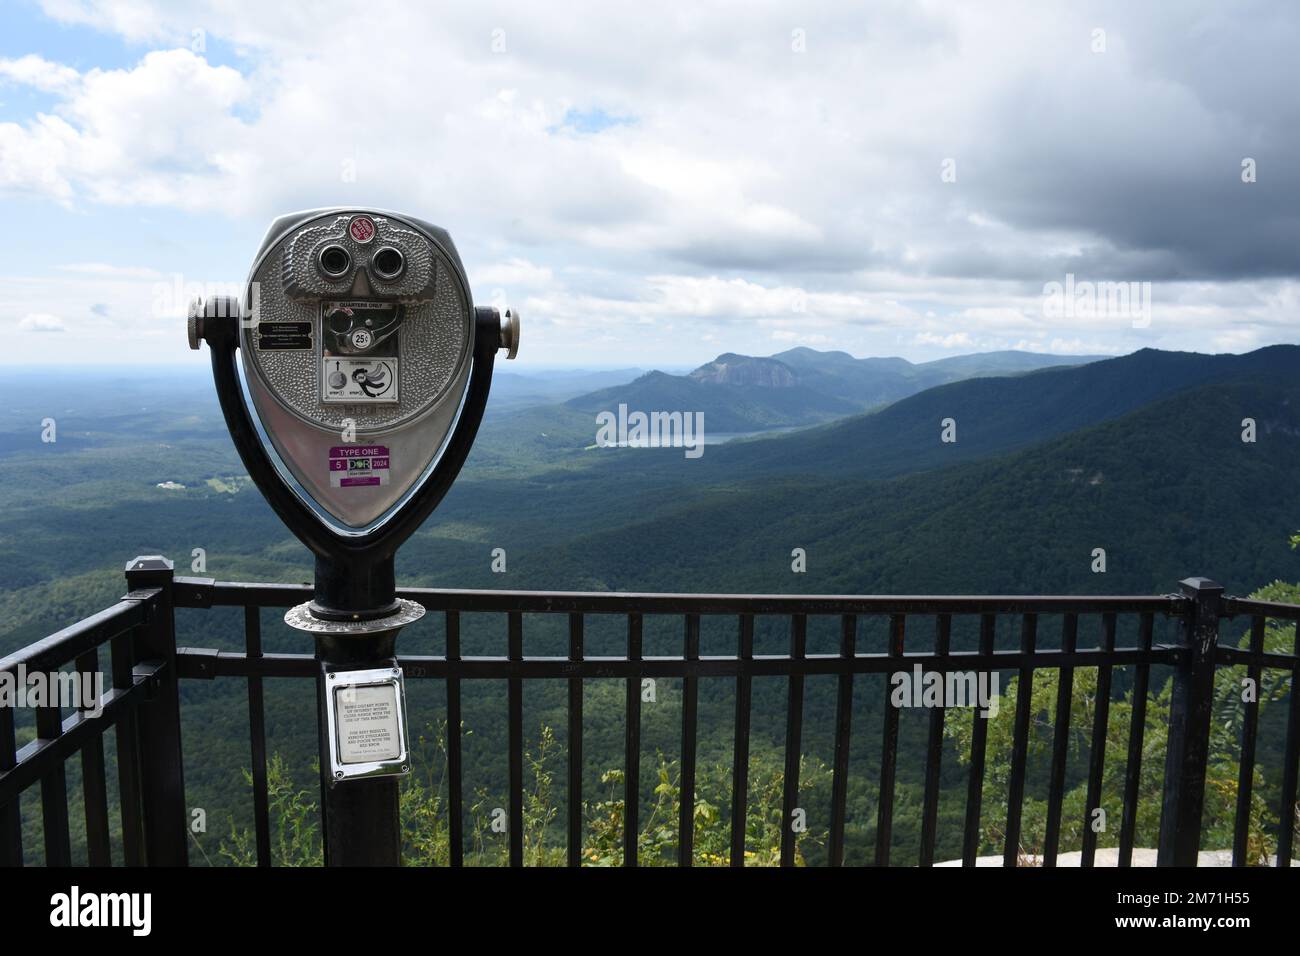 A coin operated Binocular at an overlook in Caesars Head State Park located in South Carolina. Stock Photo